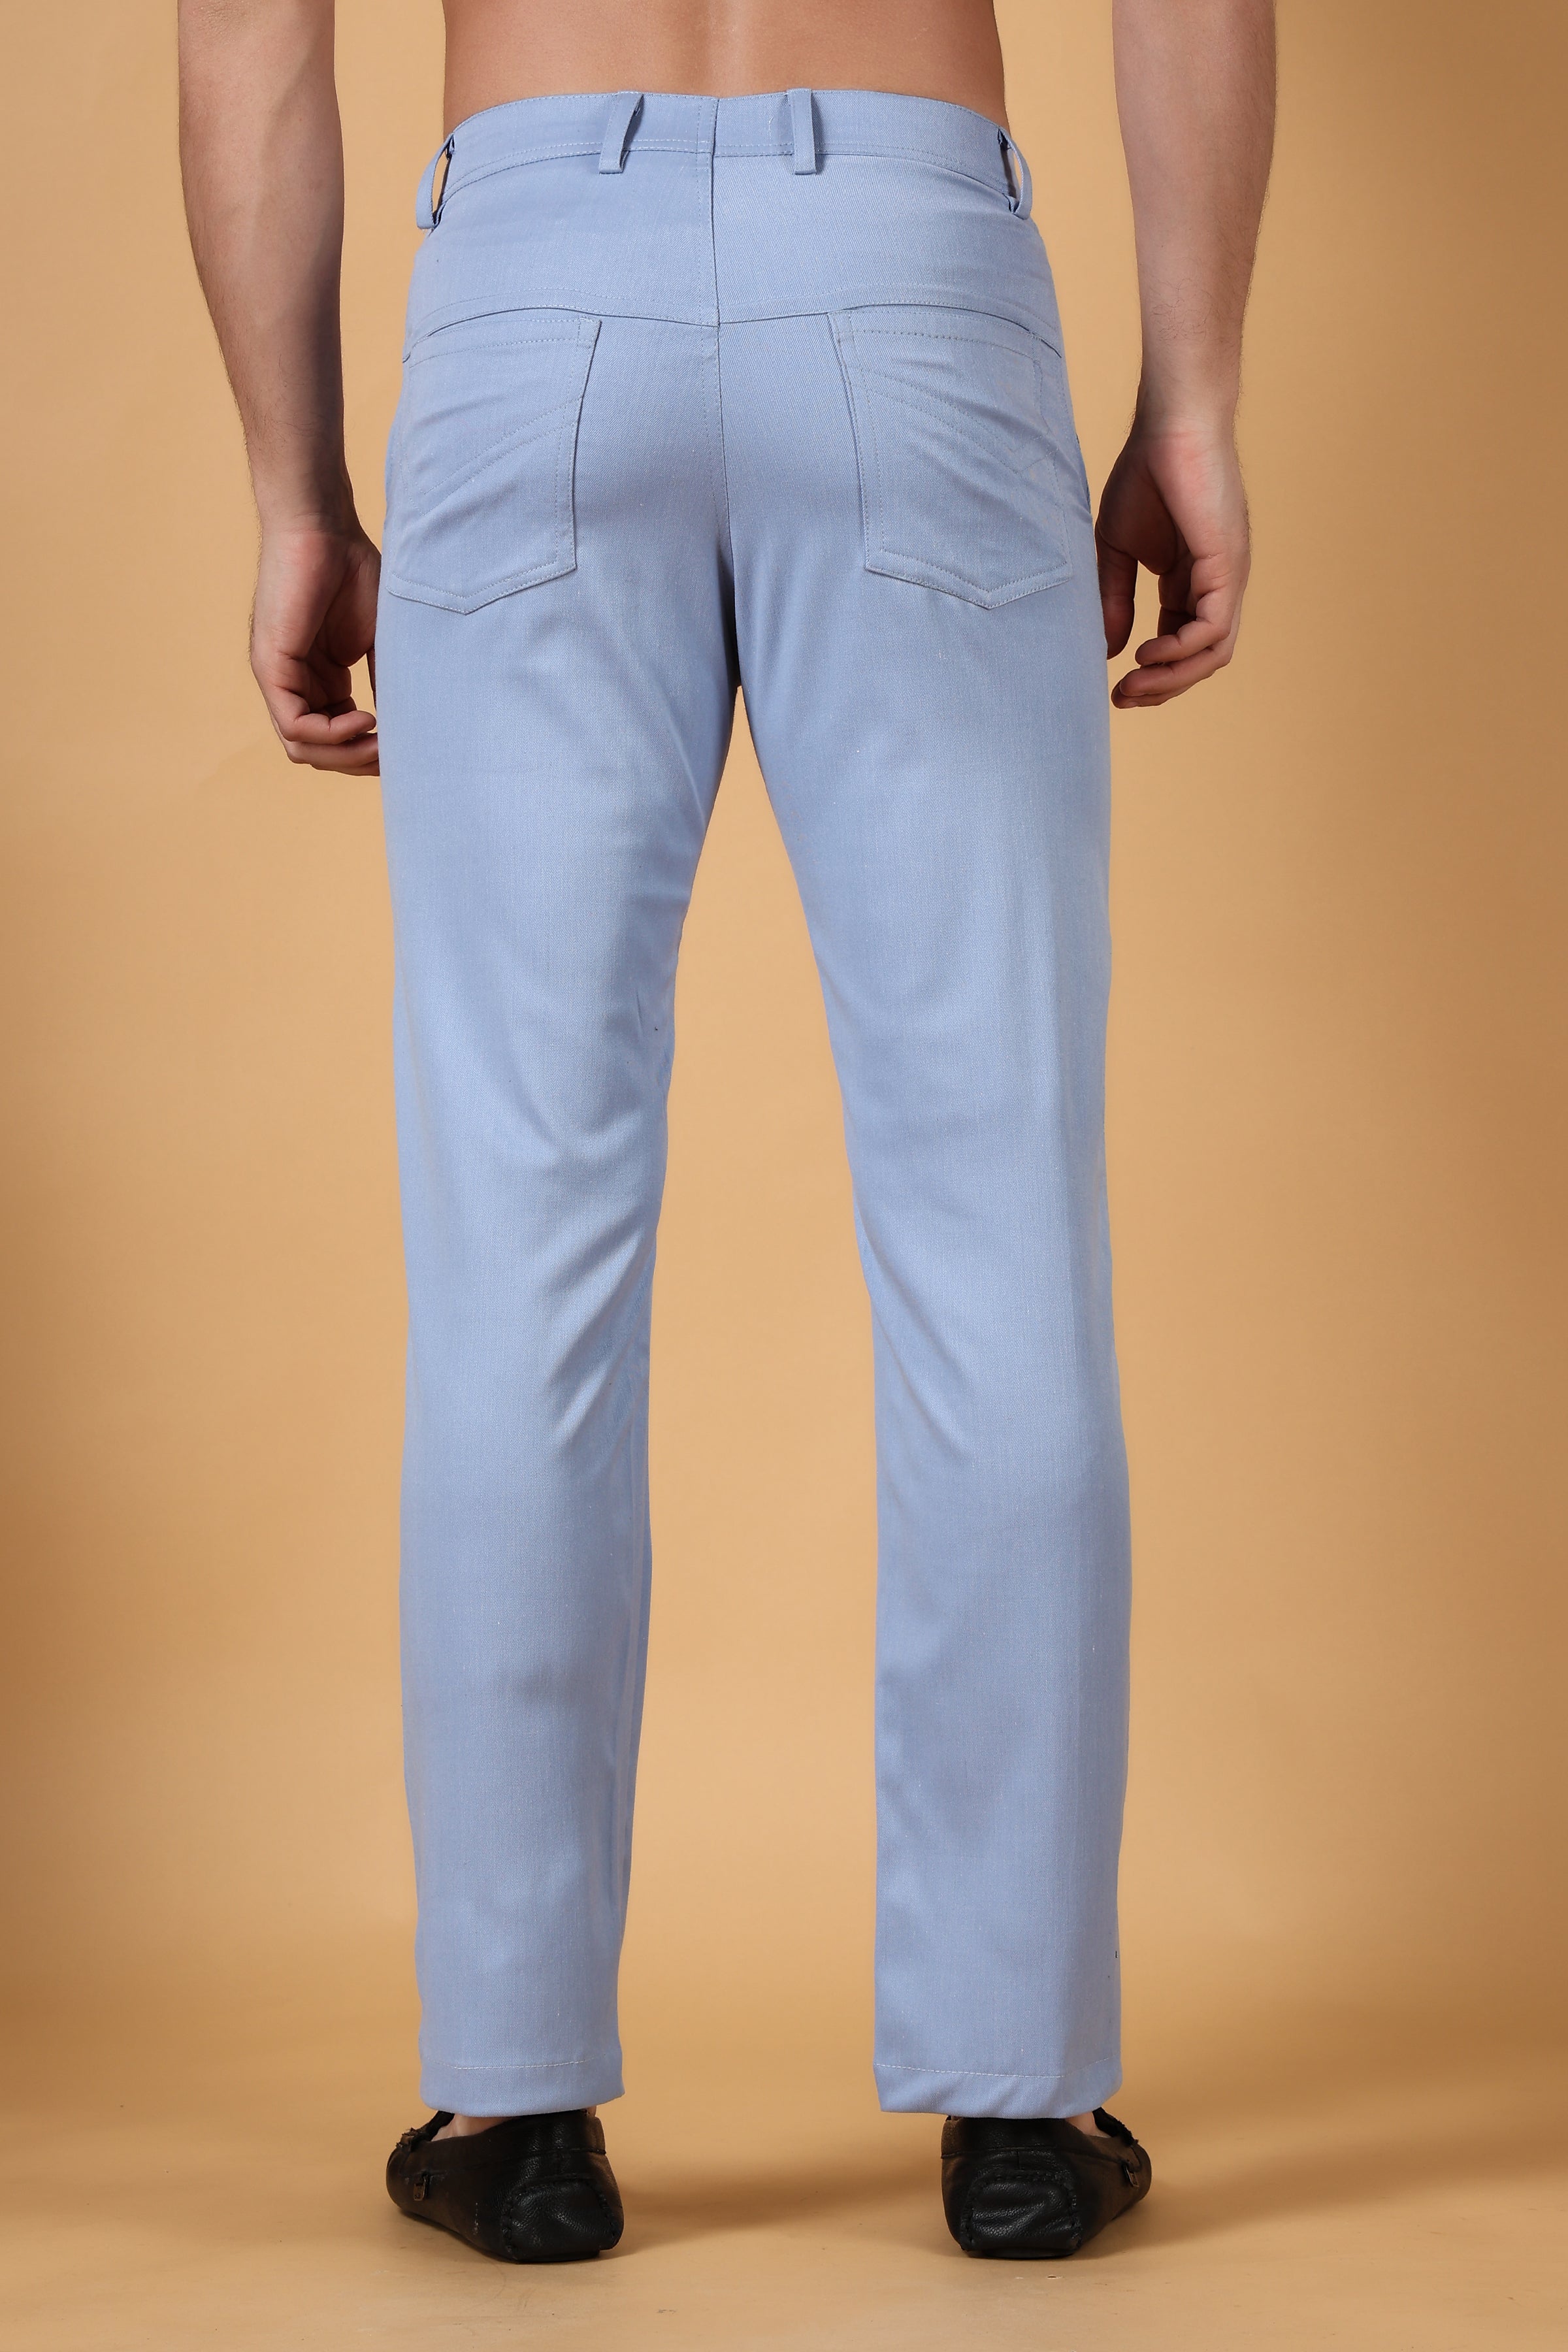 Blue Chino Pants by Paul Taylor – The Perfect Provenance